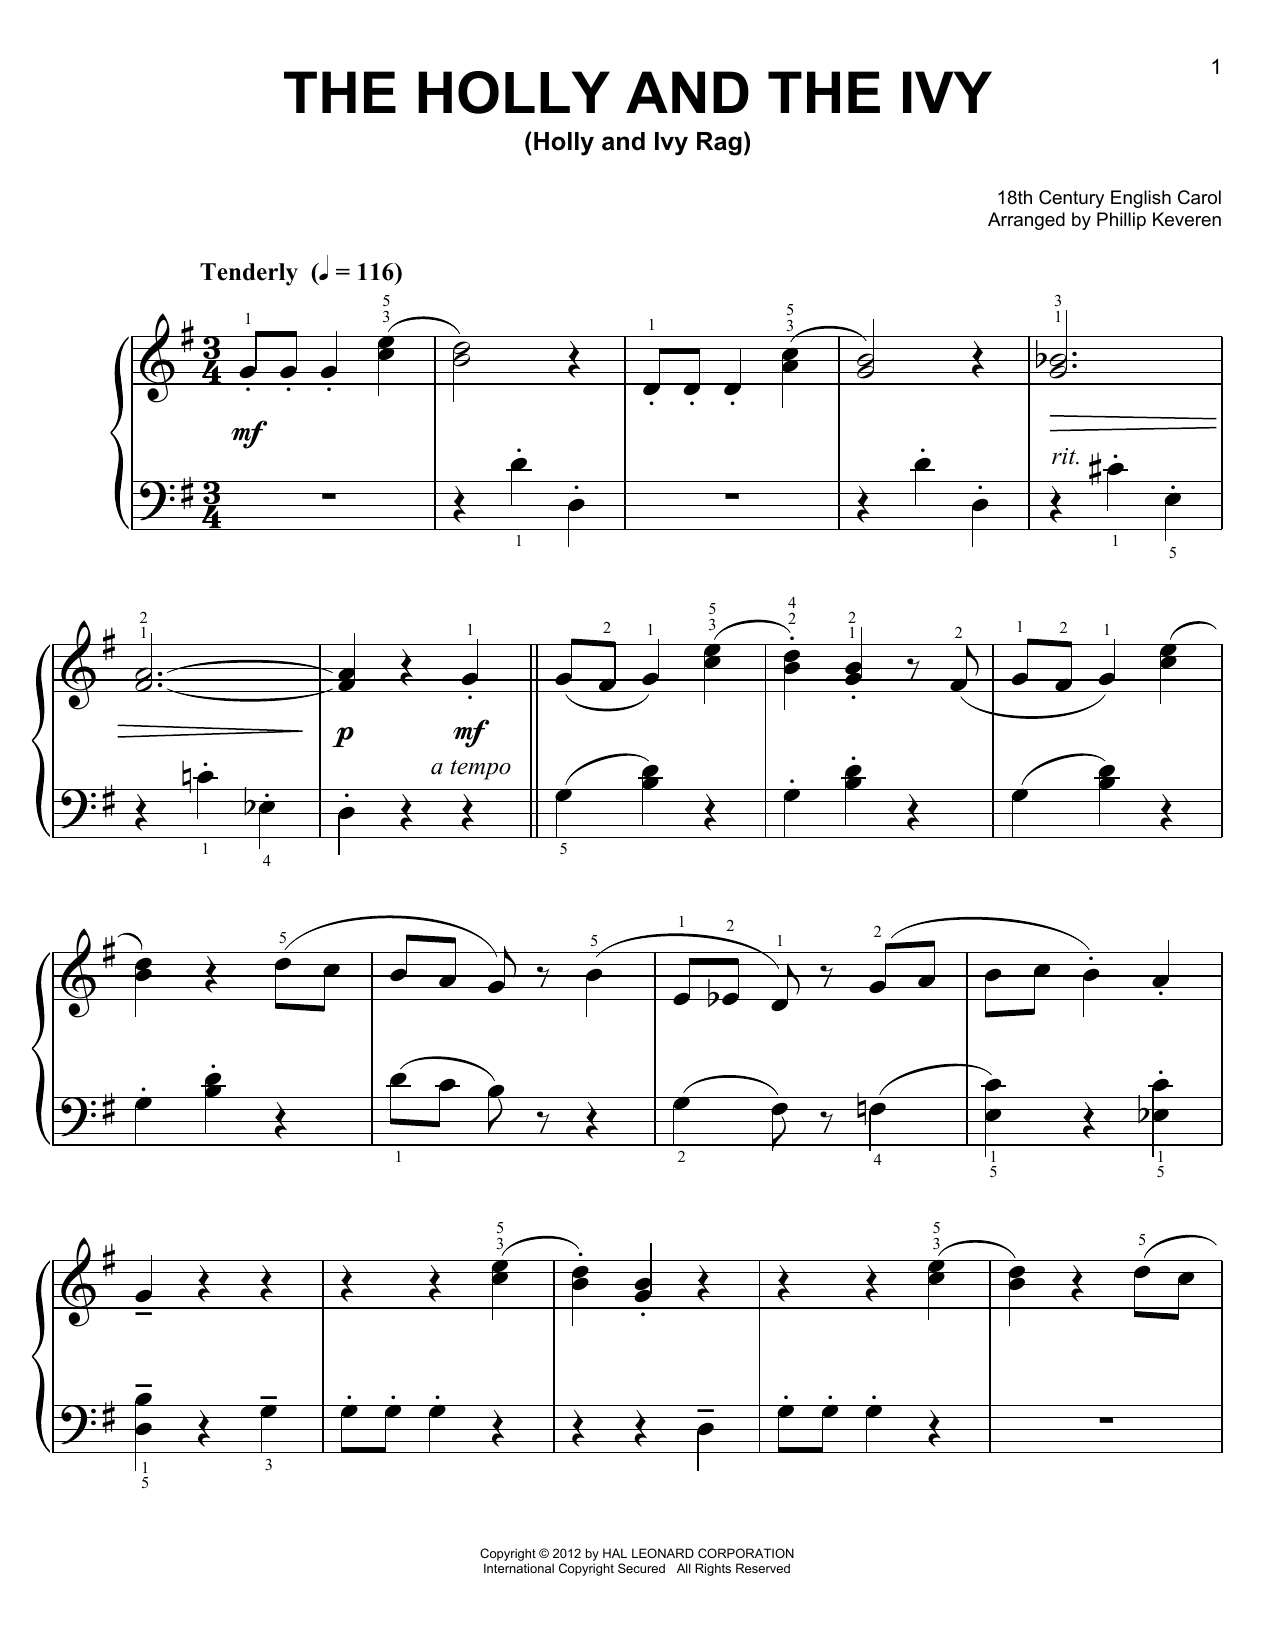 Download 18th Century English Carol The Holly And The Ivy [Ragtime version] Sheet Music